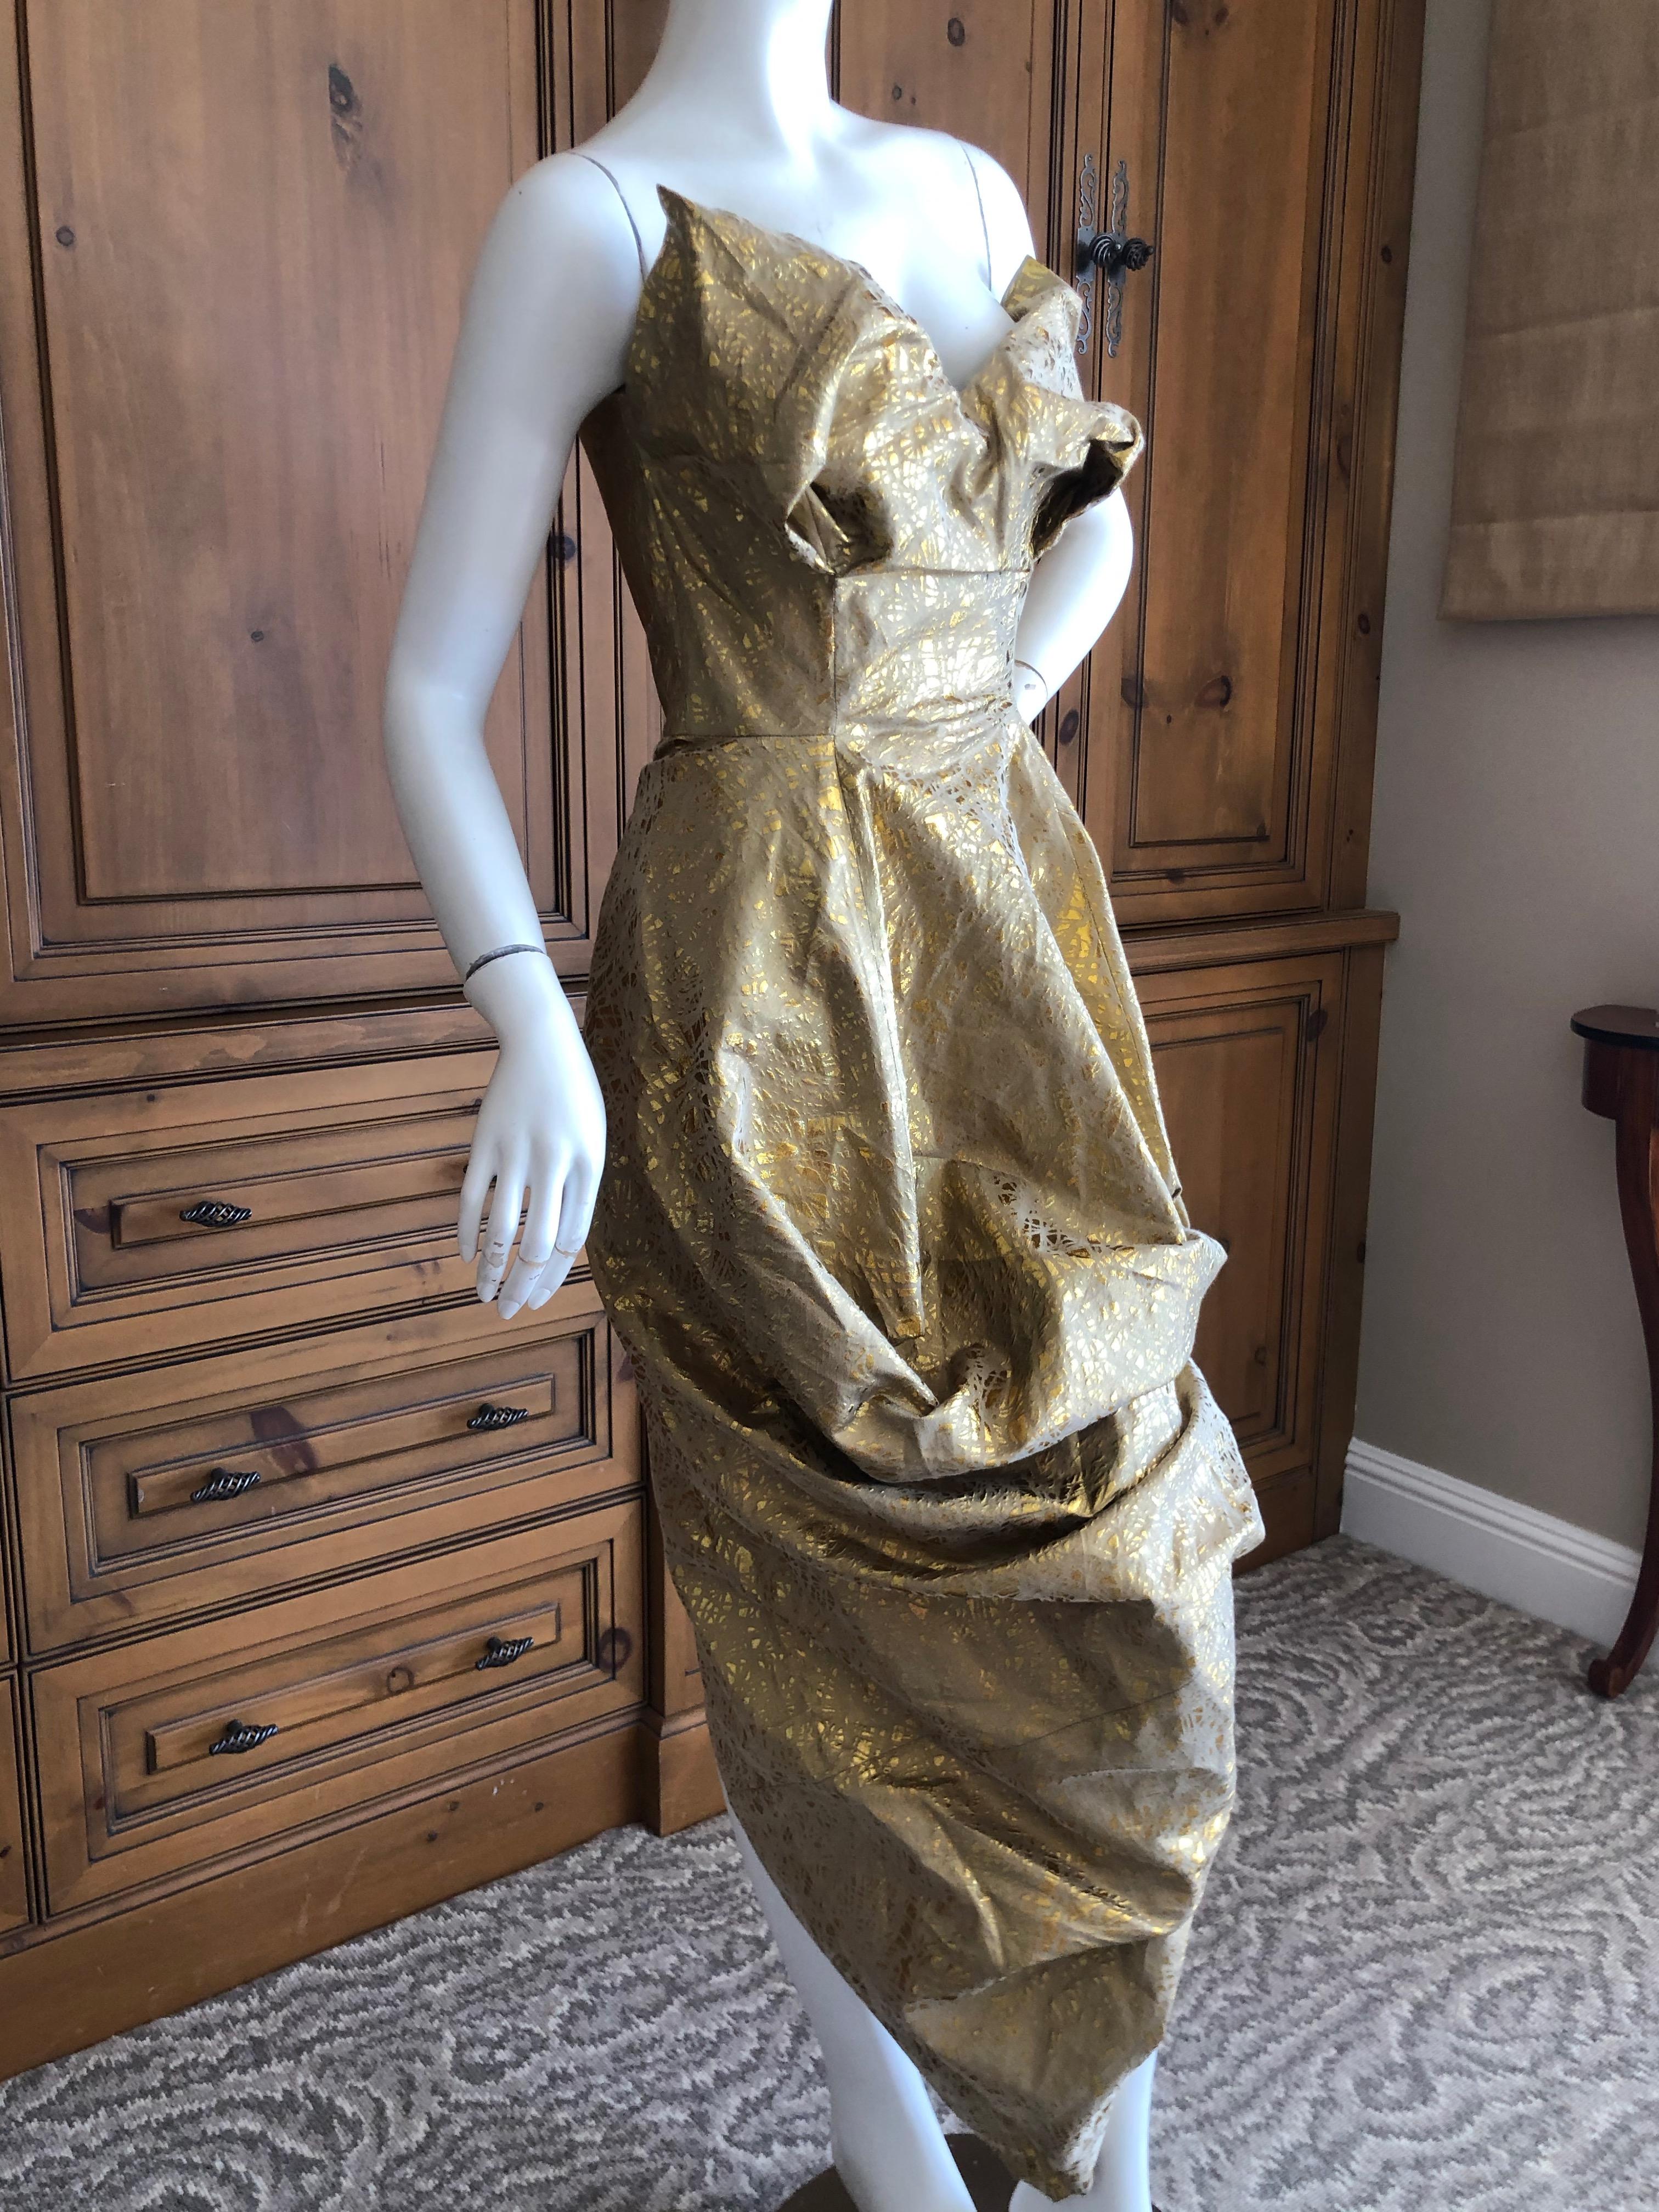 Vivienne Westwood Gold Label Elegant Gold Brocade Cocktail Dress with Built In Corset.
This has a strap and button inside that allows the wearer to go from long to short by hitching up the skirt.
From 2017
 Built in corset, a Westwood